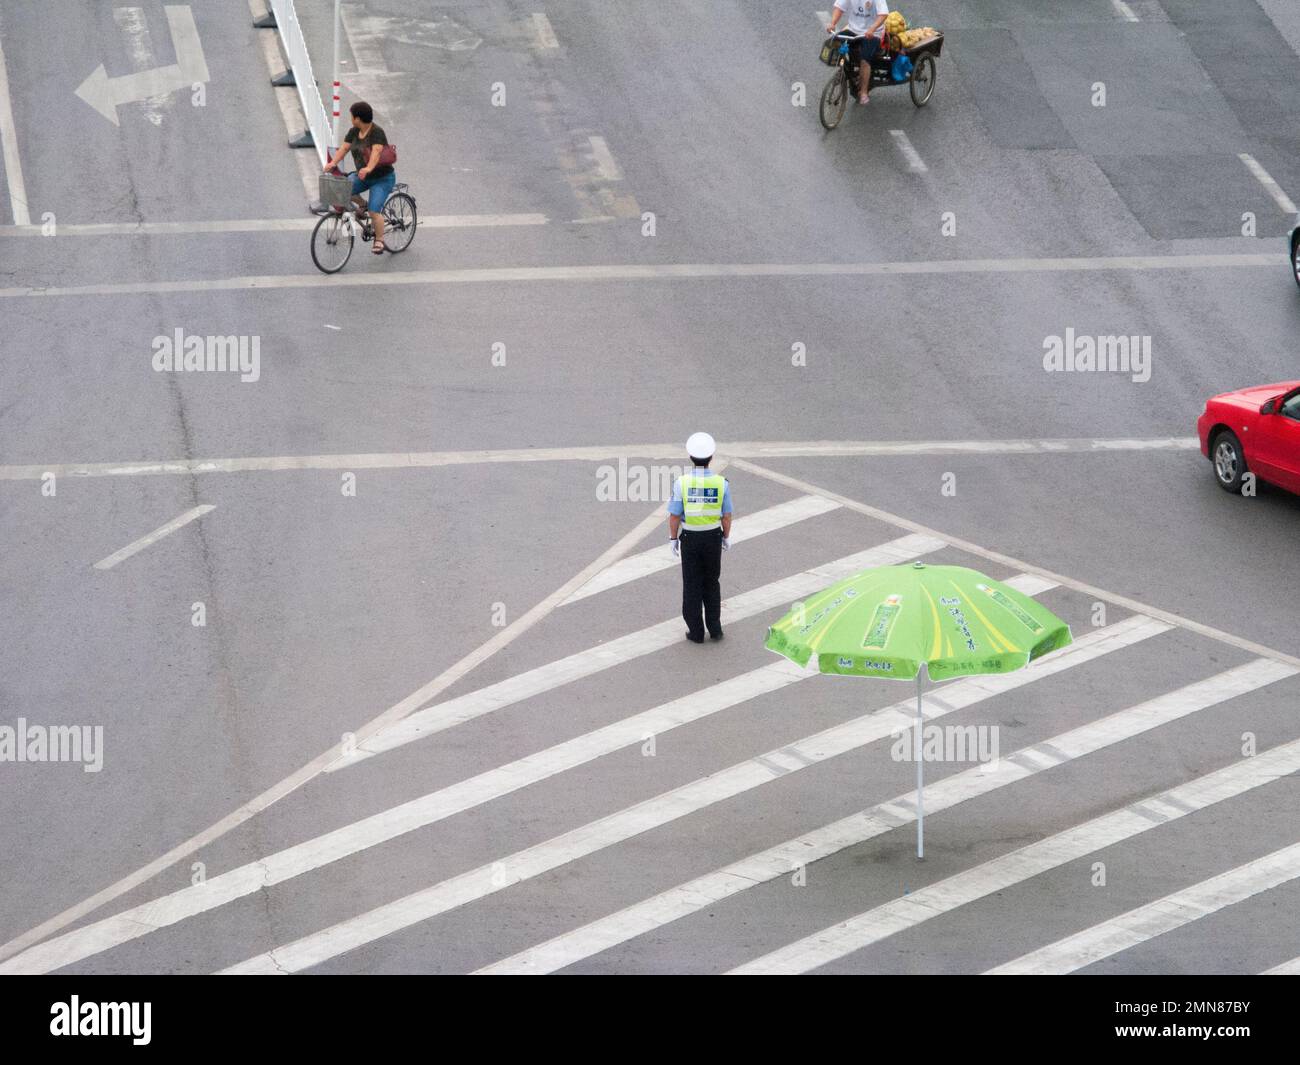 Somewhat isolated and perhaps lonely traffic officer policeman at a road junction in the Chinese city of Xi'an. PRC. China. Guiding and directing a small amount of traffic but looking exposed. He has a large parasol umbrella for shade should he need it. (125) Stock Photo